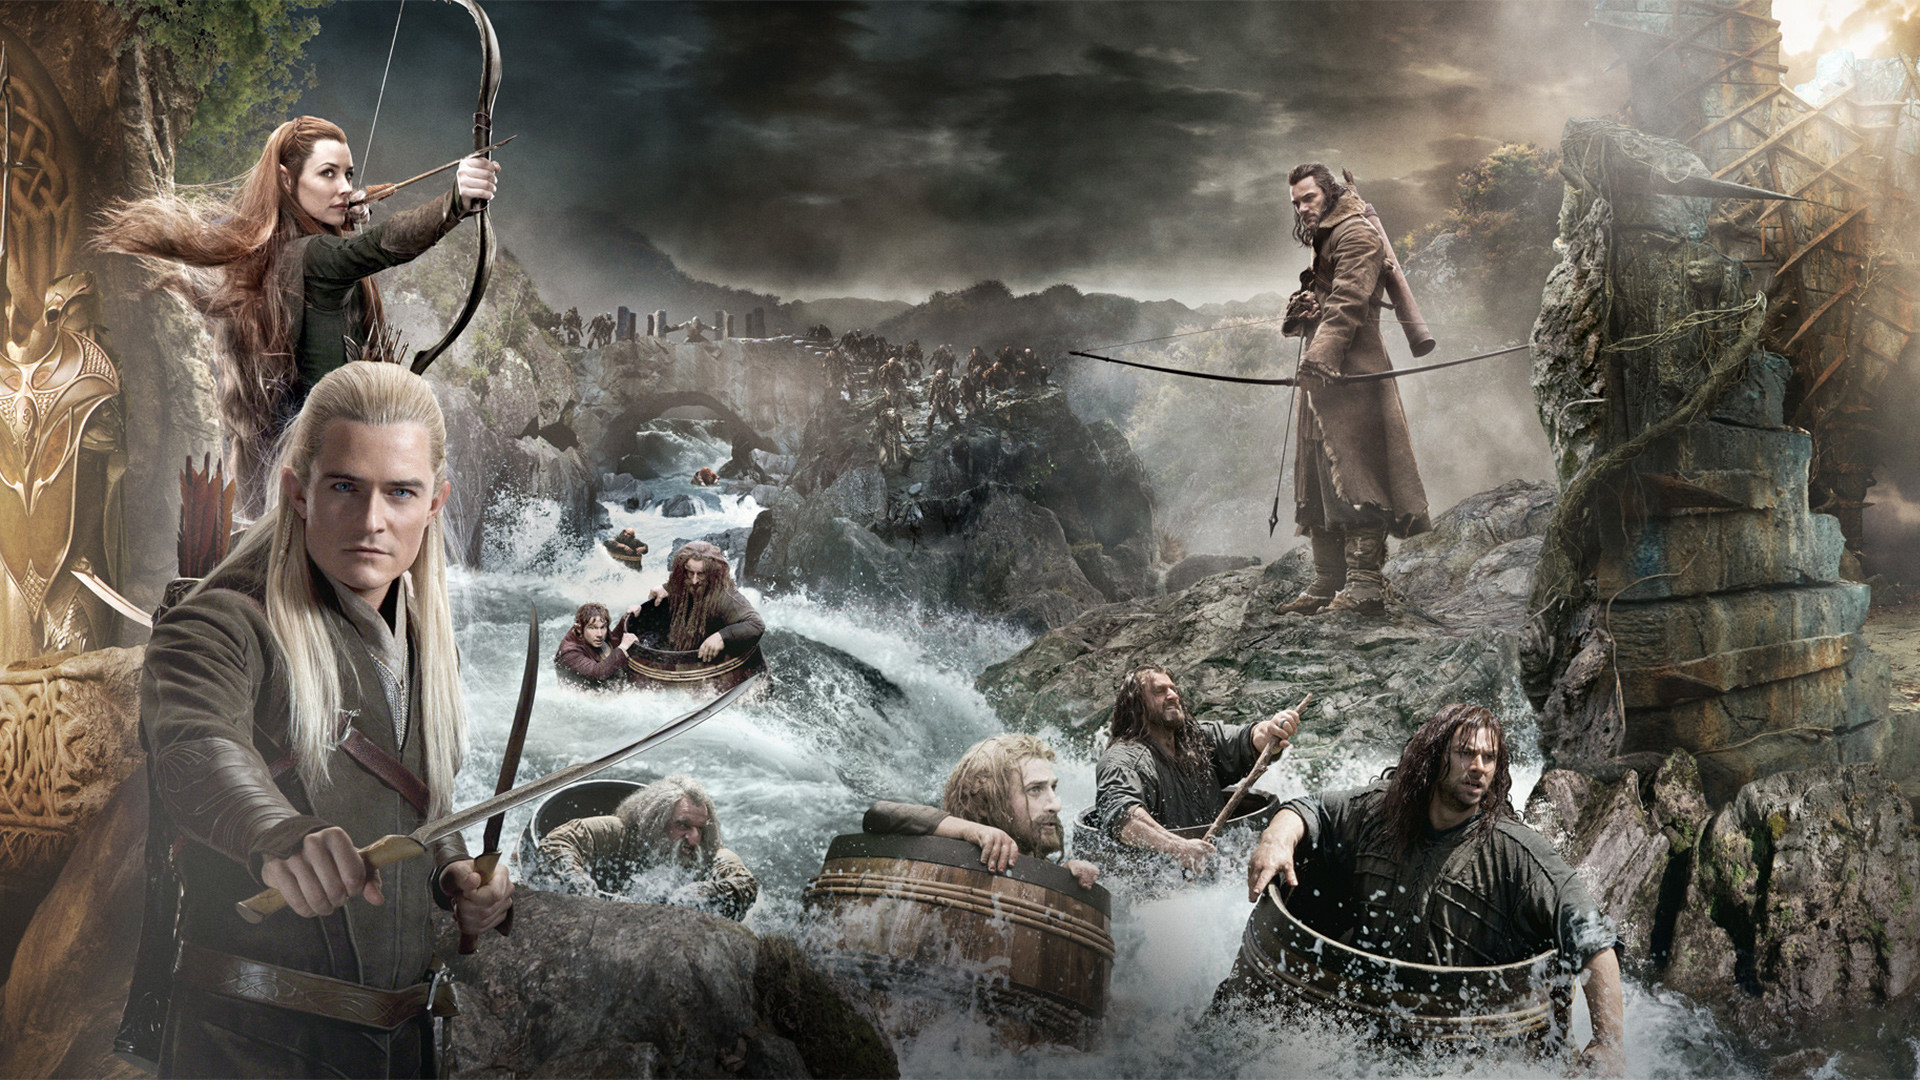 The Hobbit The Desolation of Smaug Characters desktop PC and Mac wallpaper